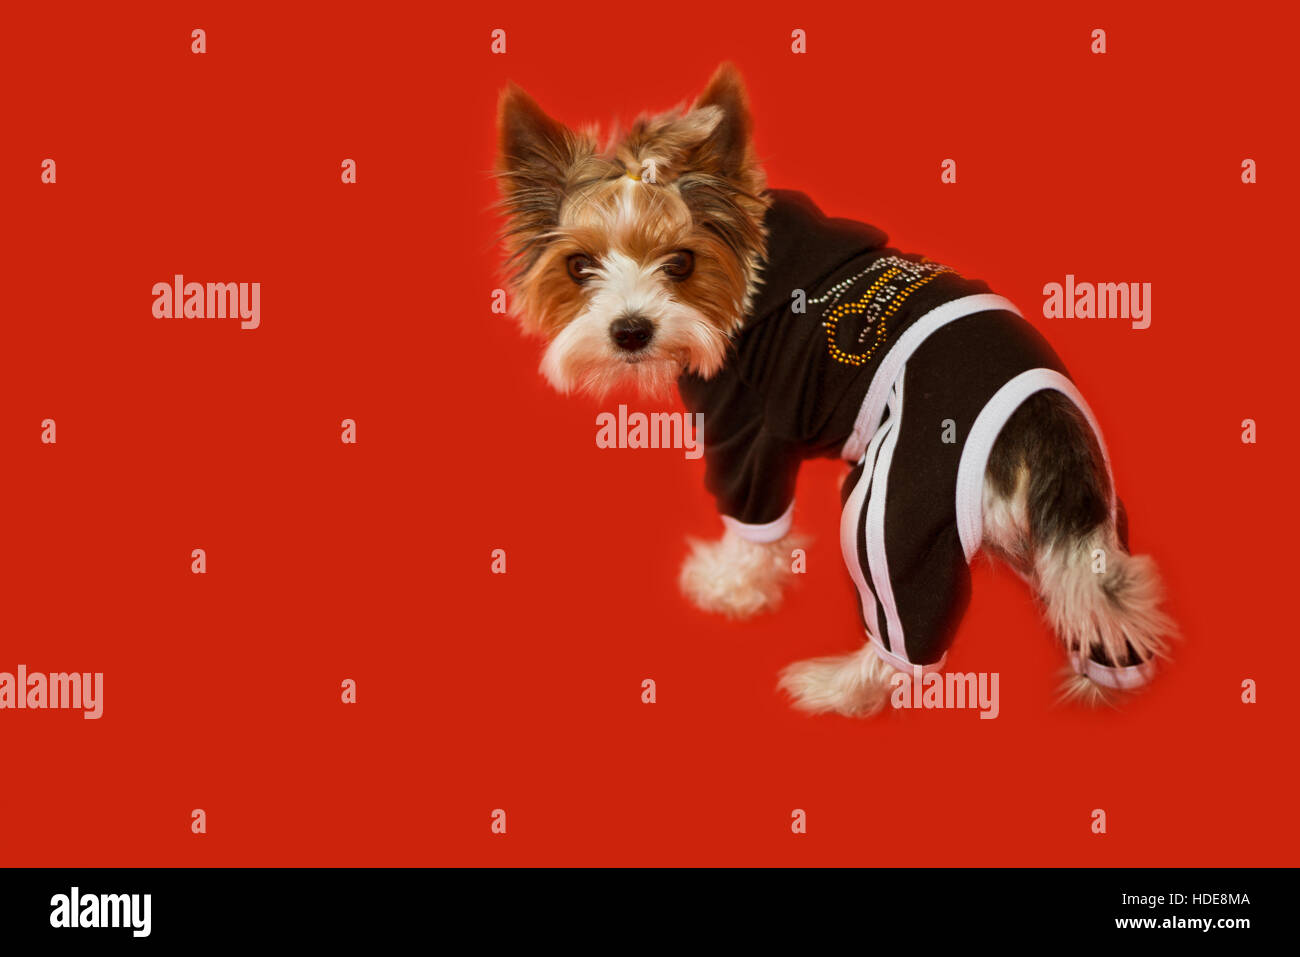 Silky terrier turned back for receiving a sweet. Focus on muzzle. Stock Photo